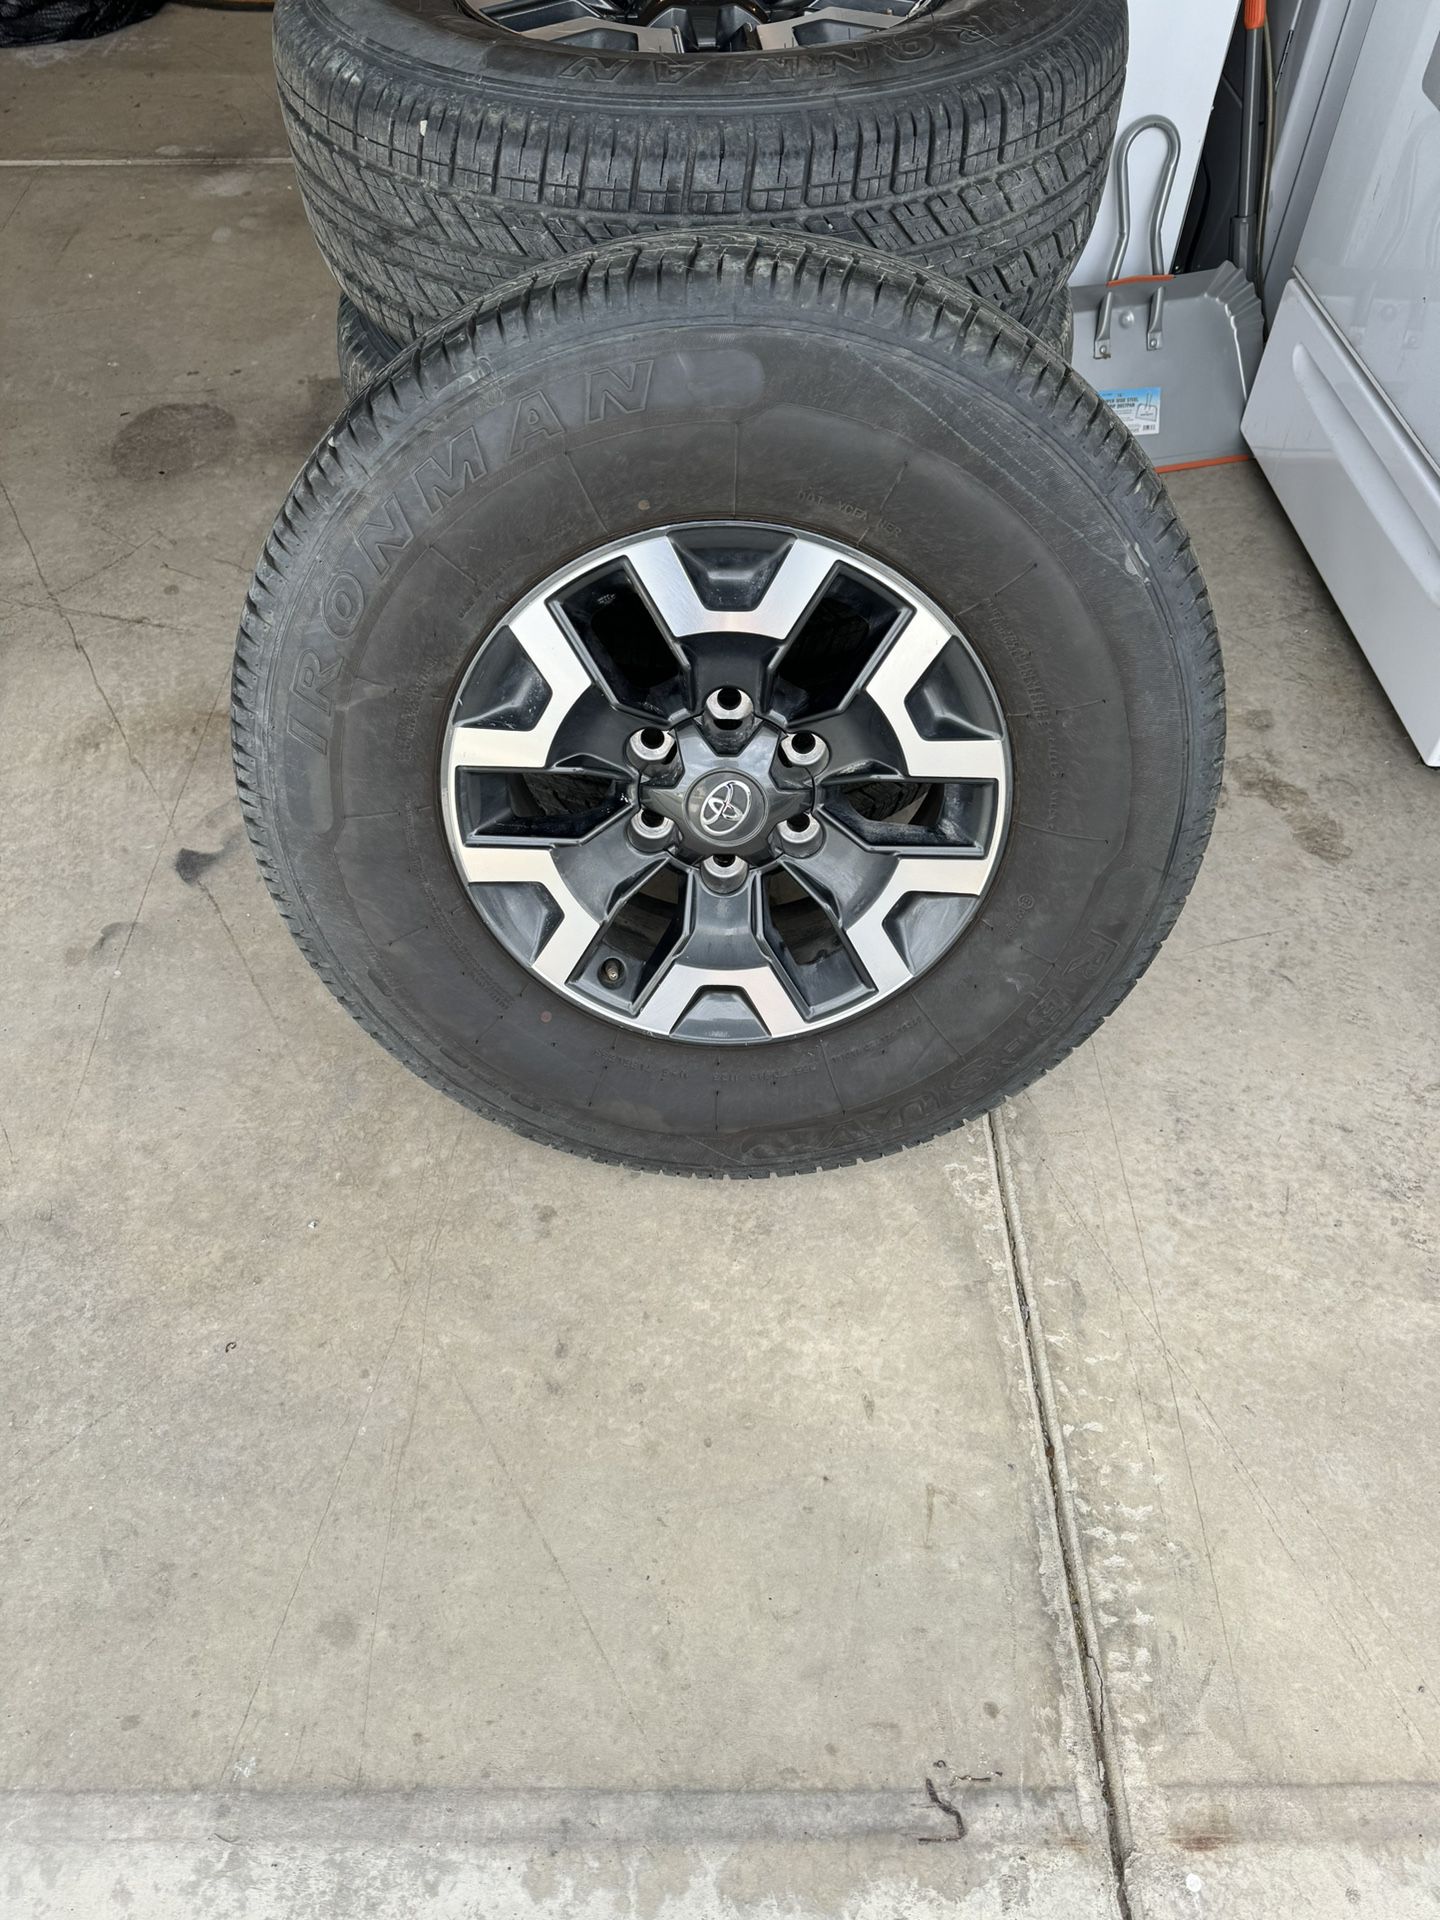 Toyota Wheels and Tires